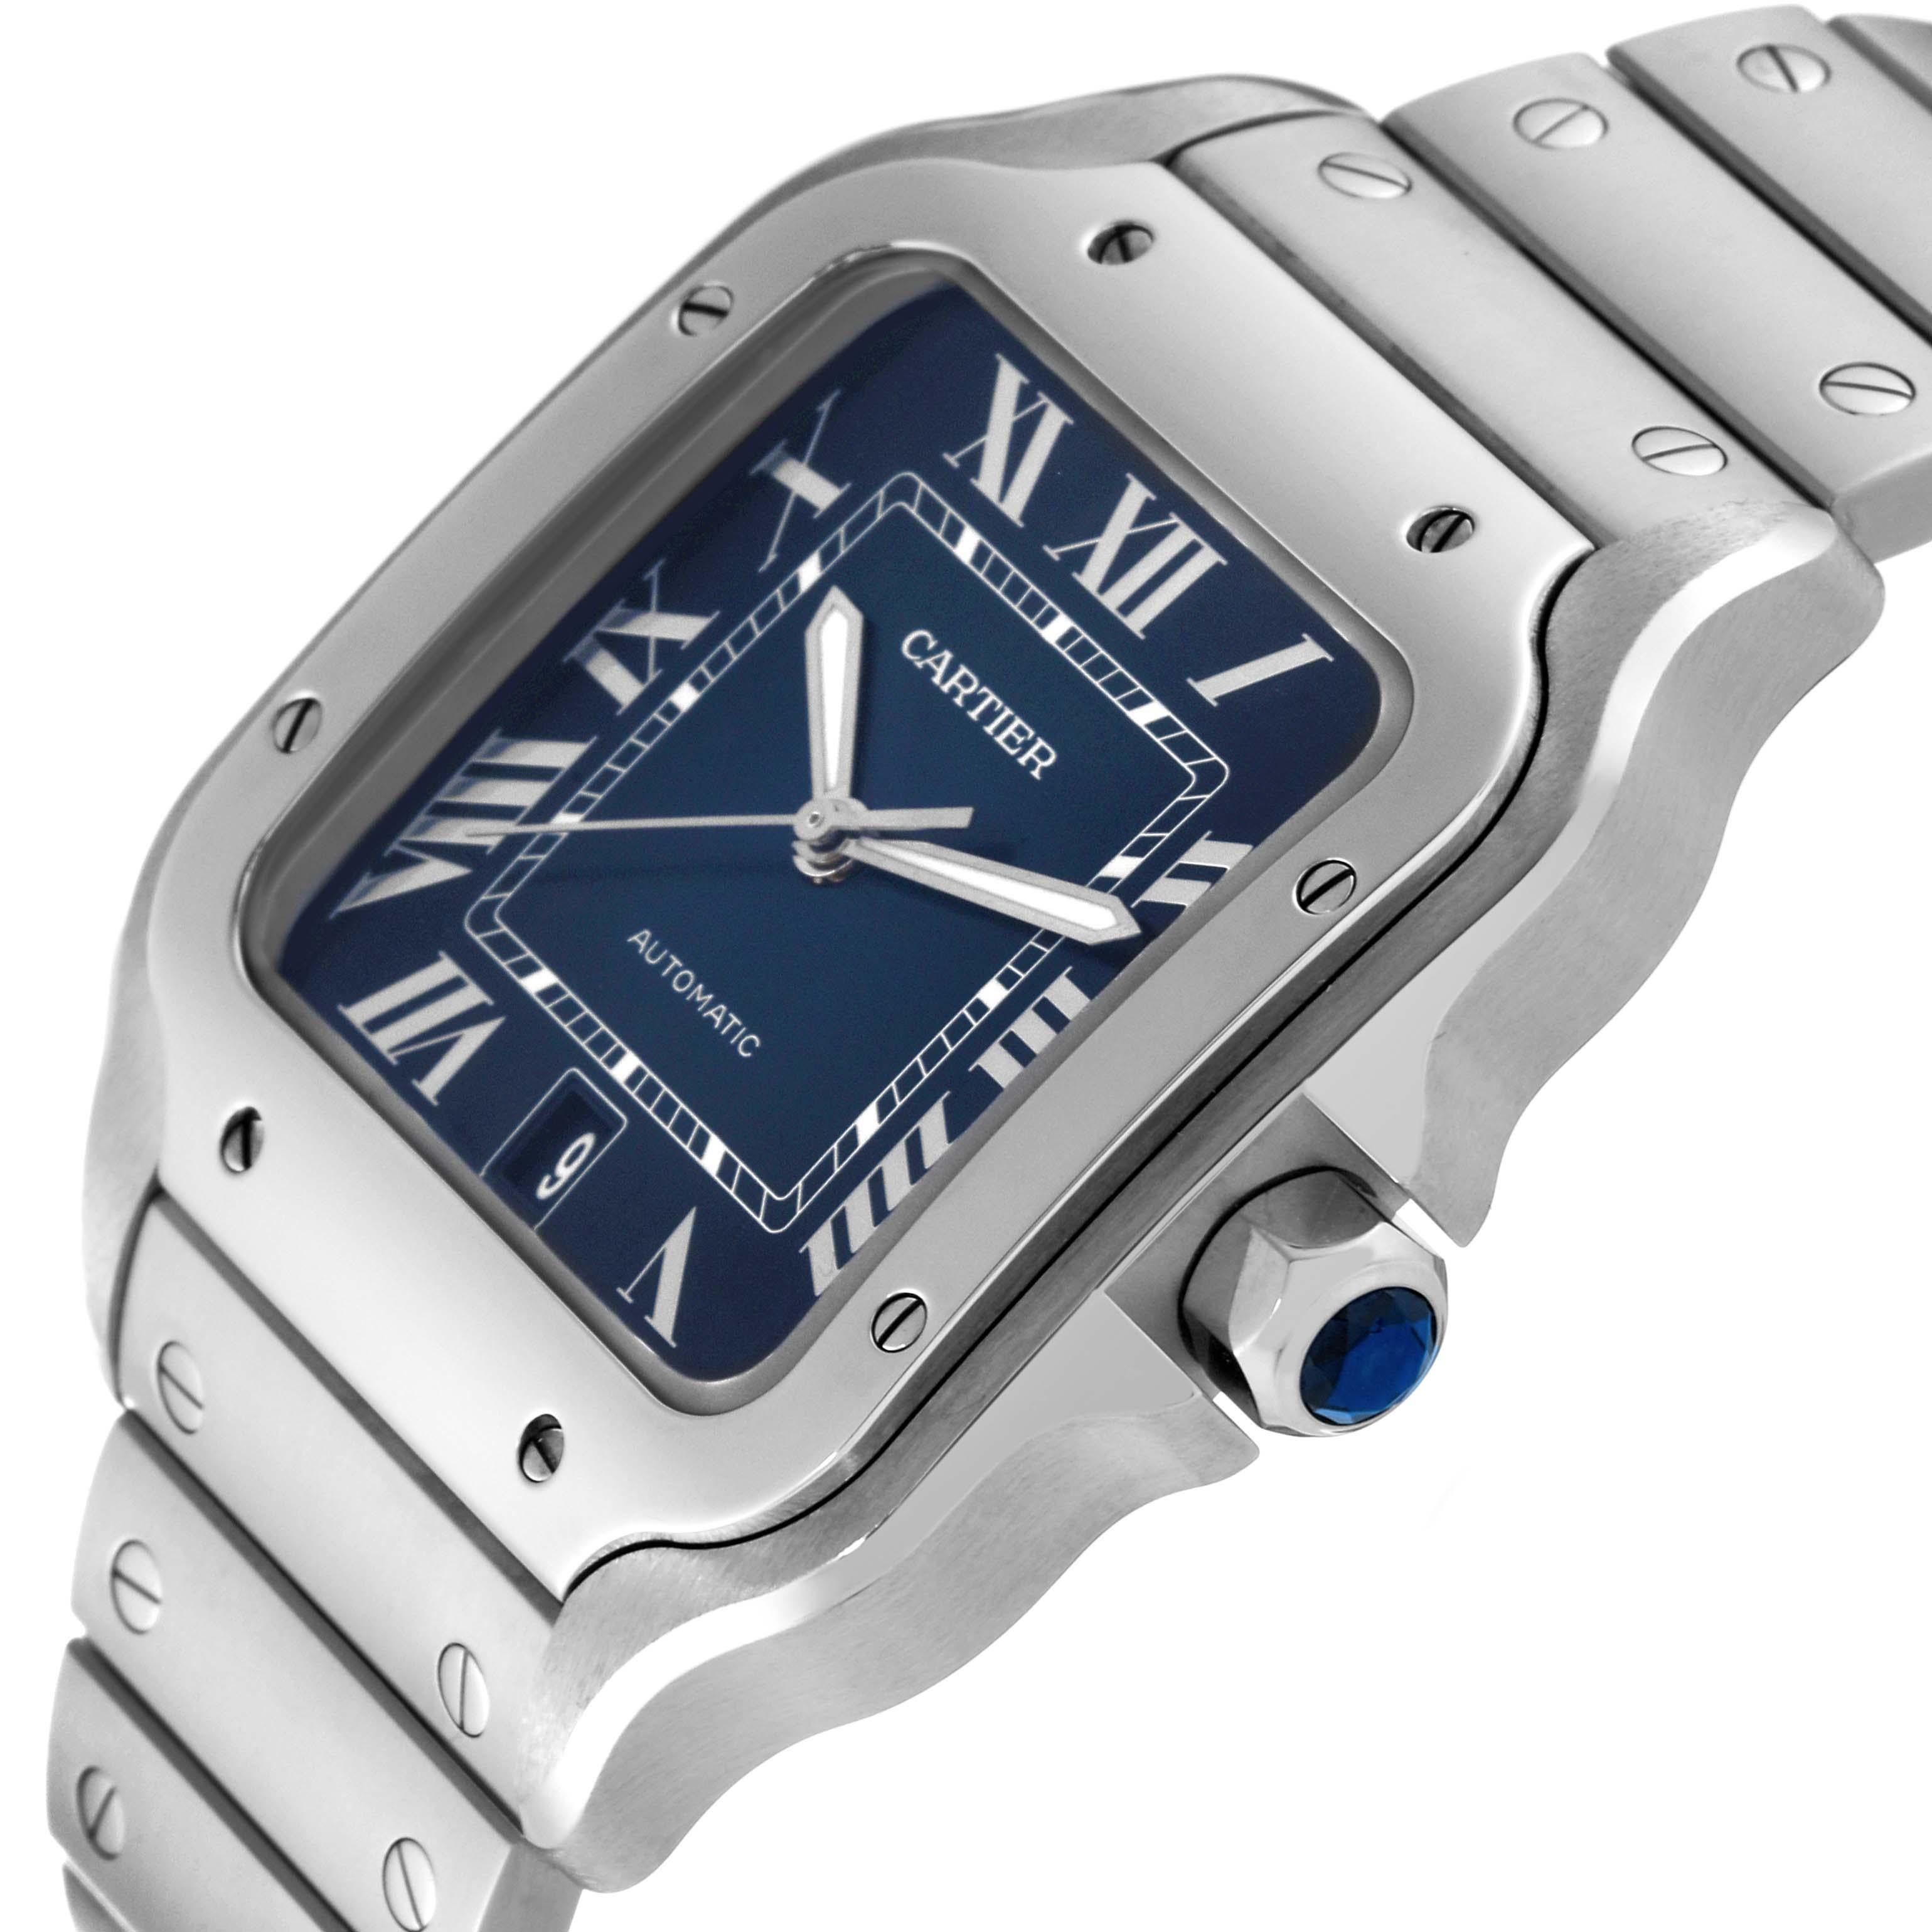 Cartier Santos Blue Dial Steel Mens Watch WSSA0030 Box Card. Automatic self-winding movement. Stainless steel case 39.8 x 47.5 mm. Protected octagonal crown set with a faceted blue spinel. Stainless steel bezel punctuated with 8 signature screws.